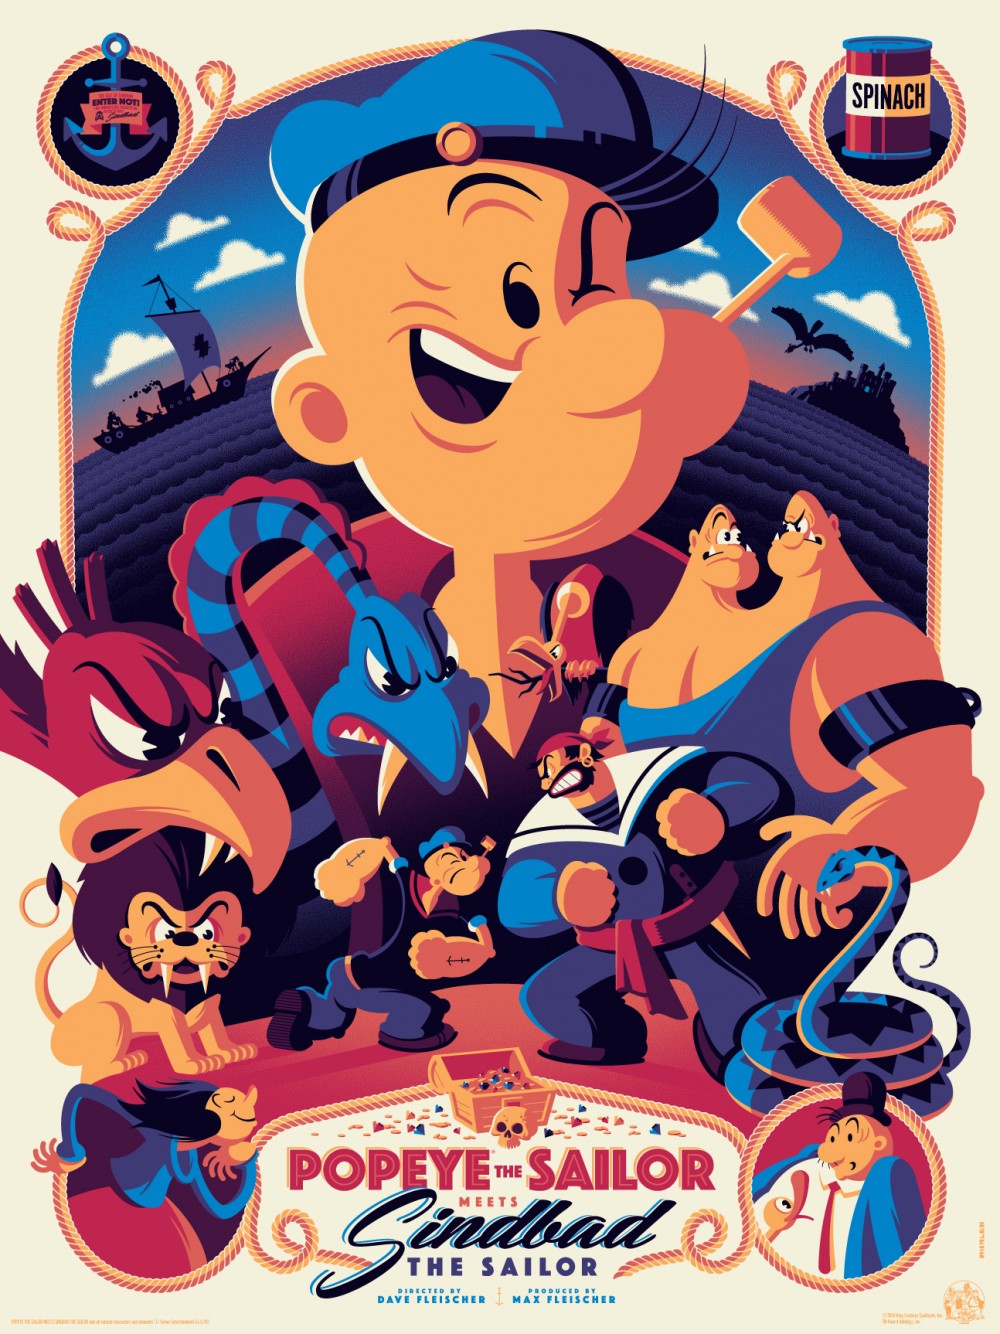 "Popeye the Sailor Meets Sinbad the Sailor" by Tom Whalen.  18" x 24" Screenprint.  Standard (Ed of 50, $100) : Foil (Ed of 10, $150)